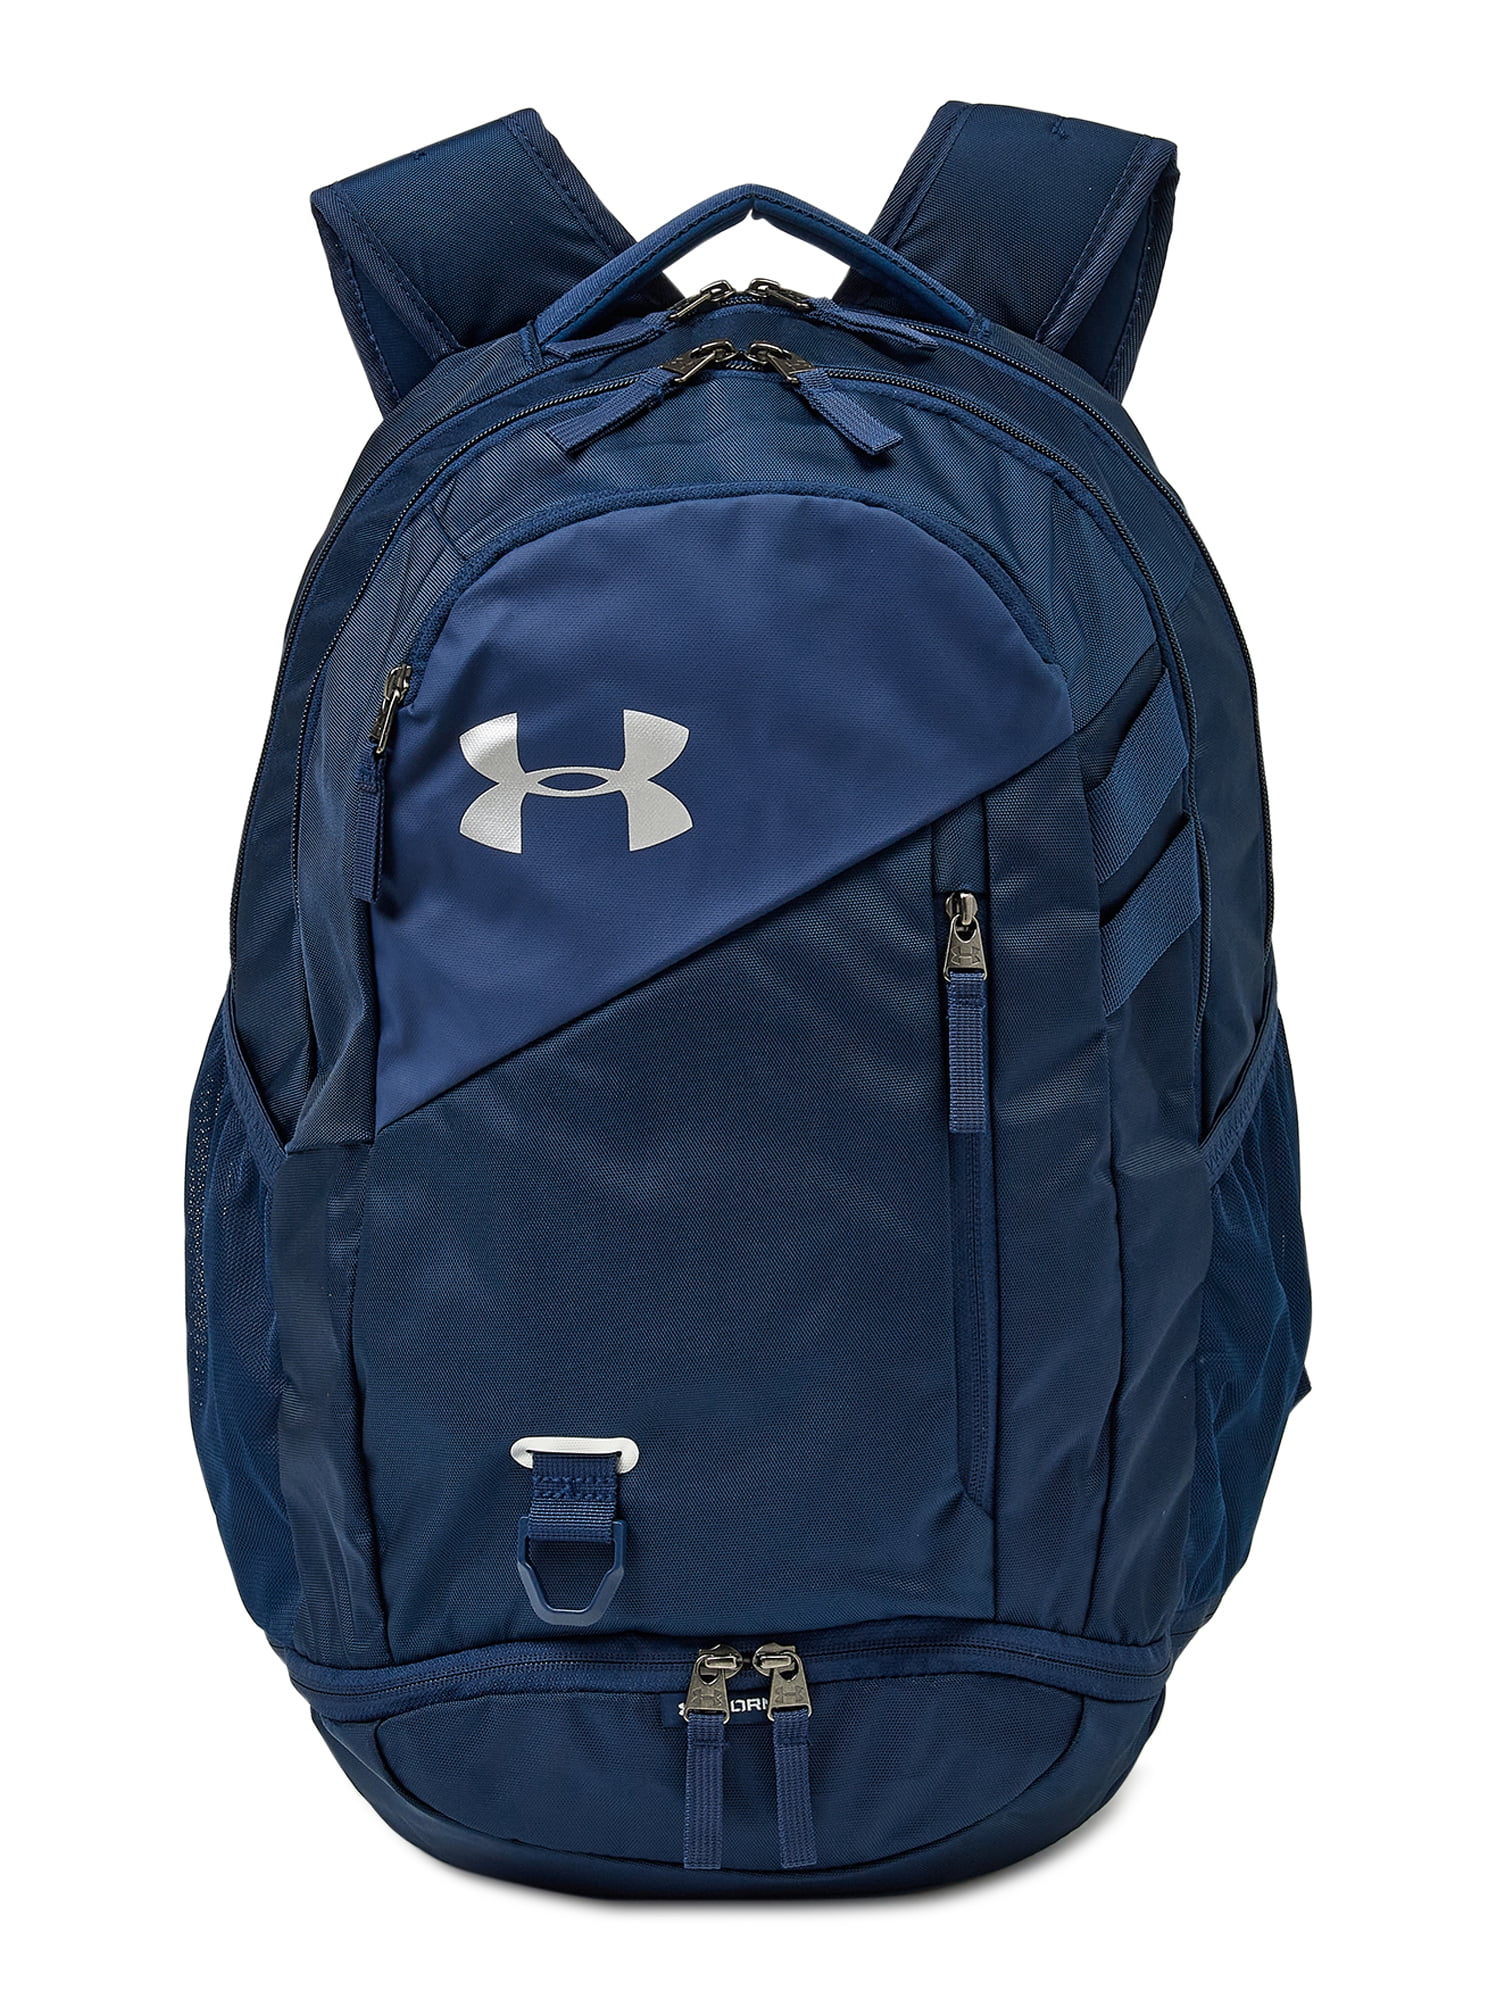 Leisure Under Armour Outdoor Sports Travel Bag Backpack Back Pack Book Bag 